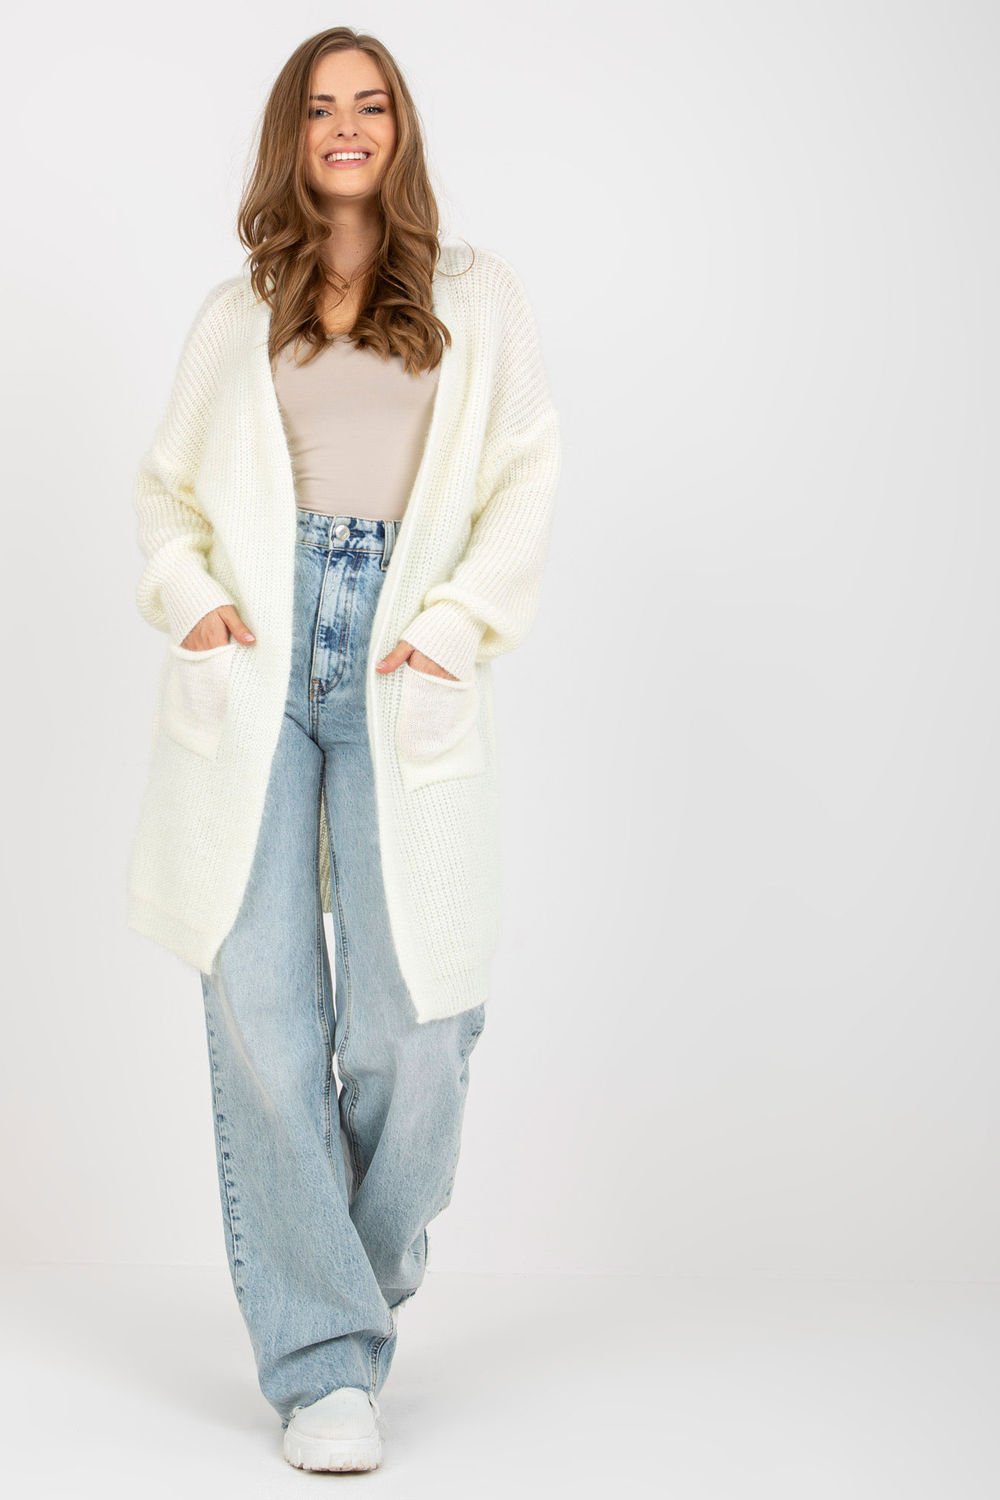 Long Knit Mohair Cardigan with Front Pockets